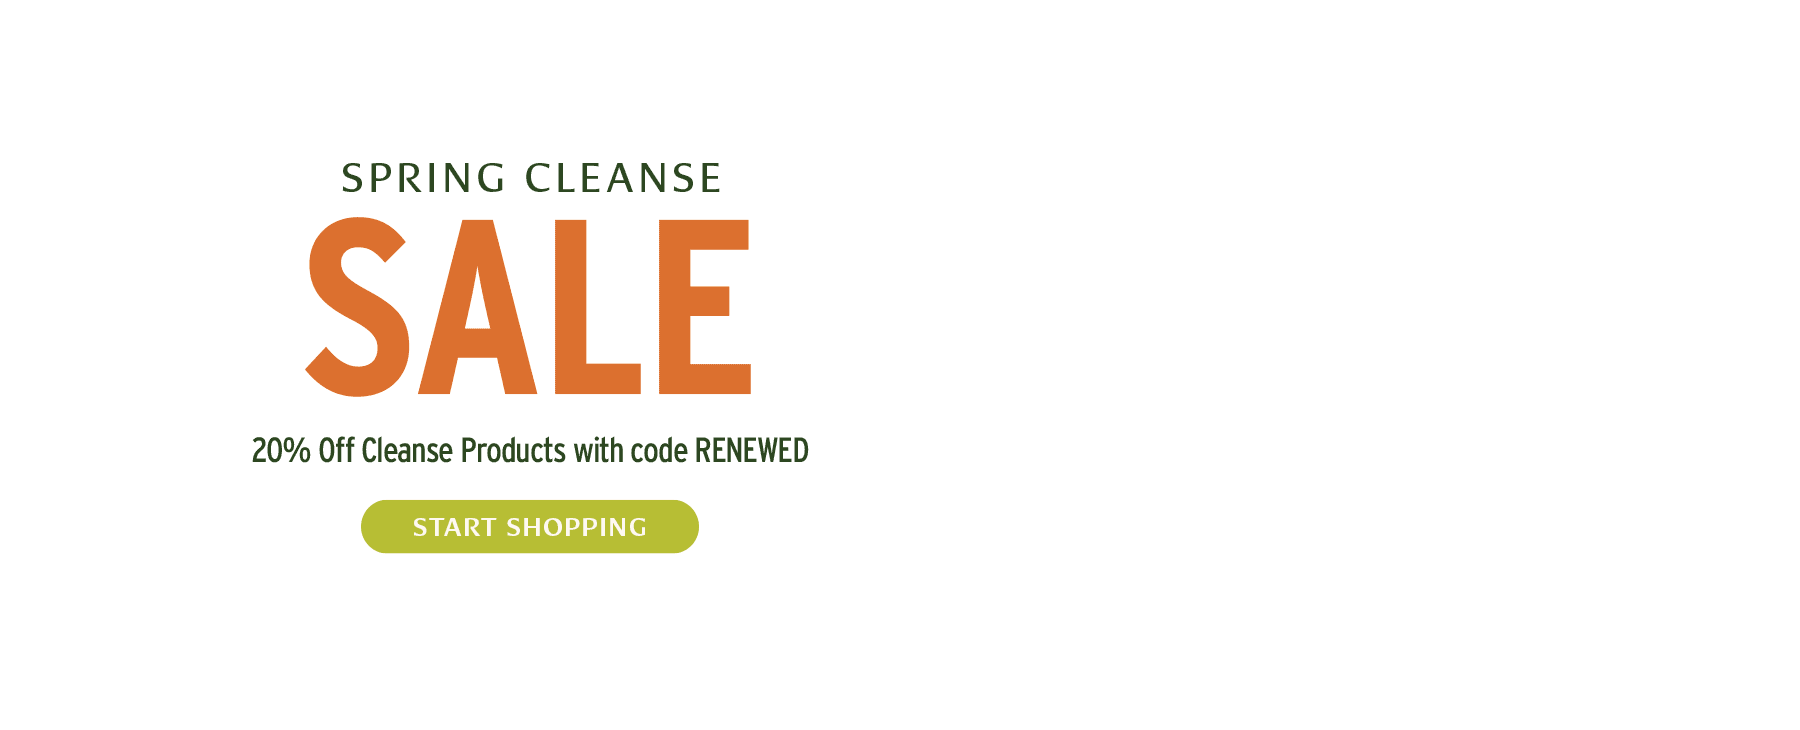 Spring Cleanse Sale | 20% Off Cleanse Products with code RENEWED